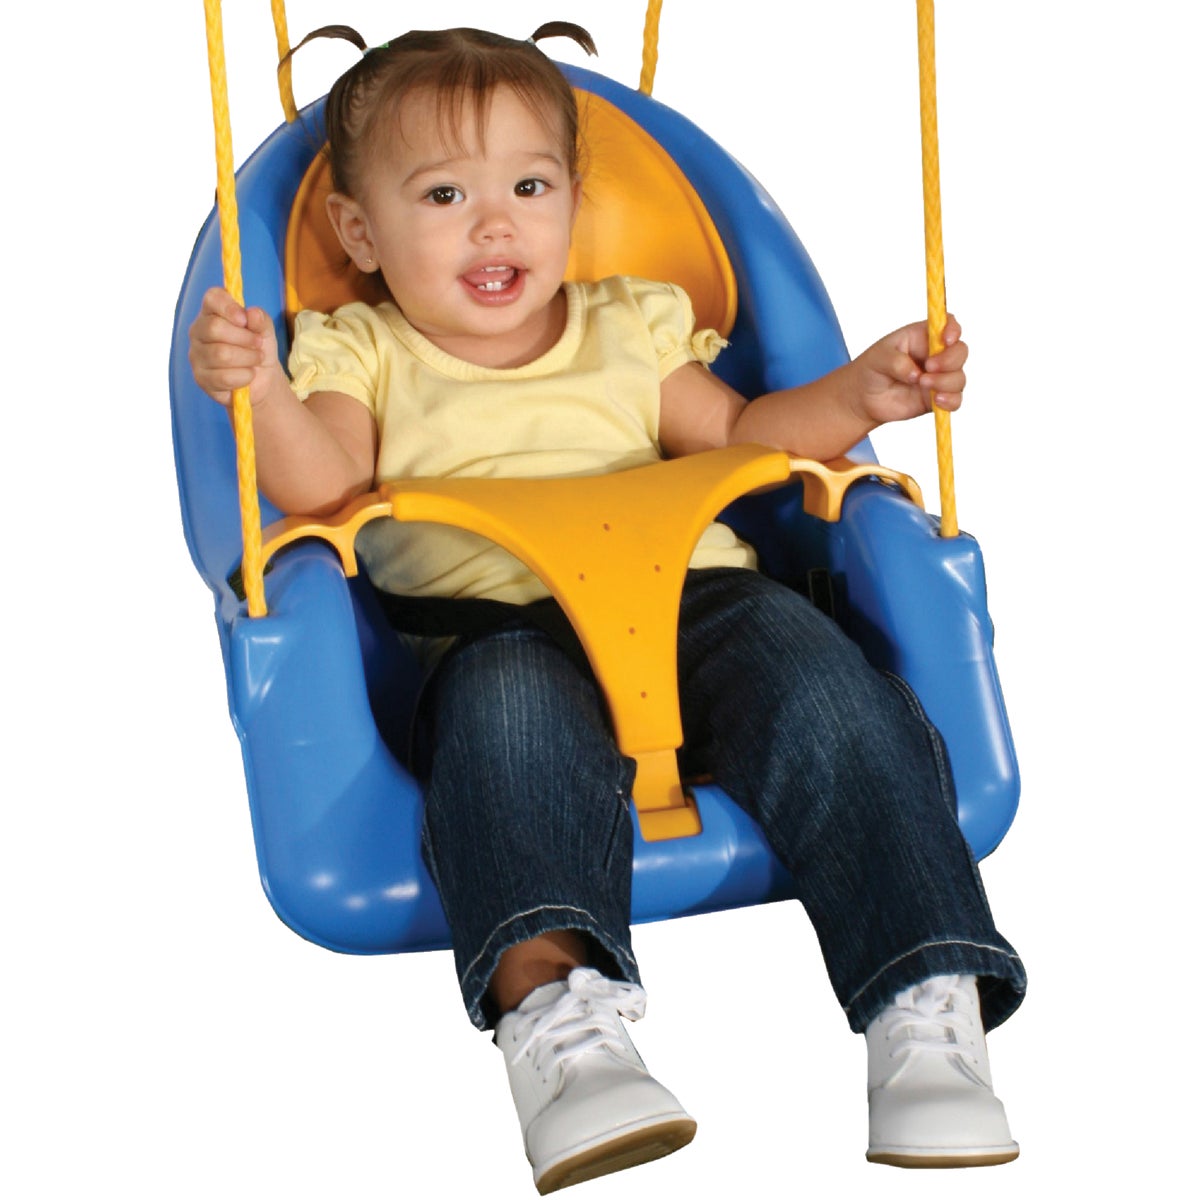 Item 800500, Comfy-N-Secure coaster swing sets a new standard for child swings.